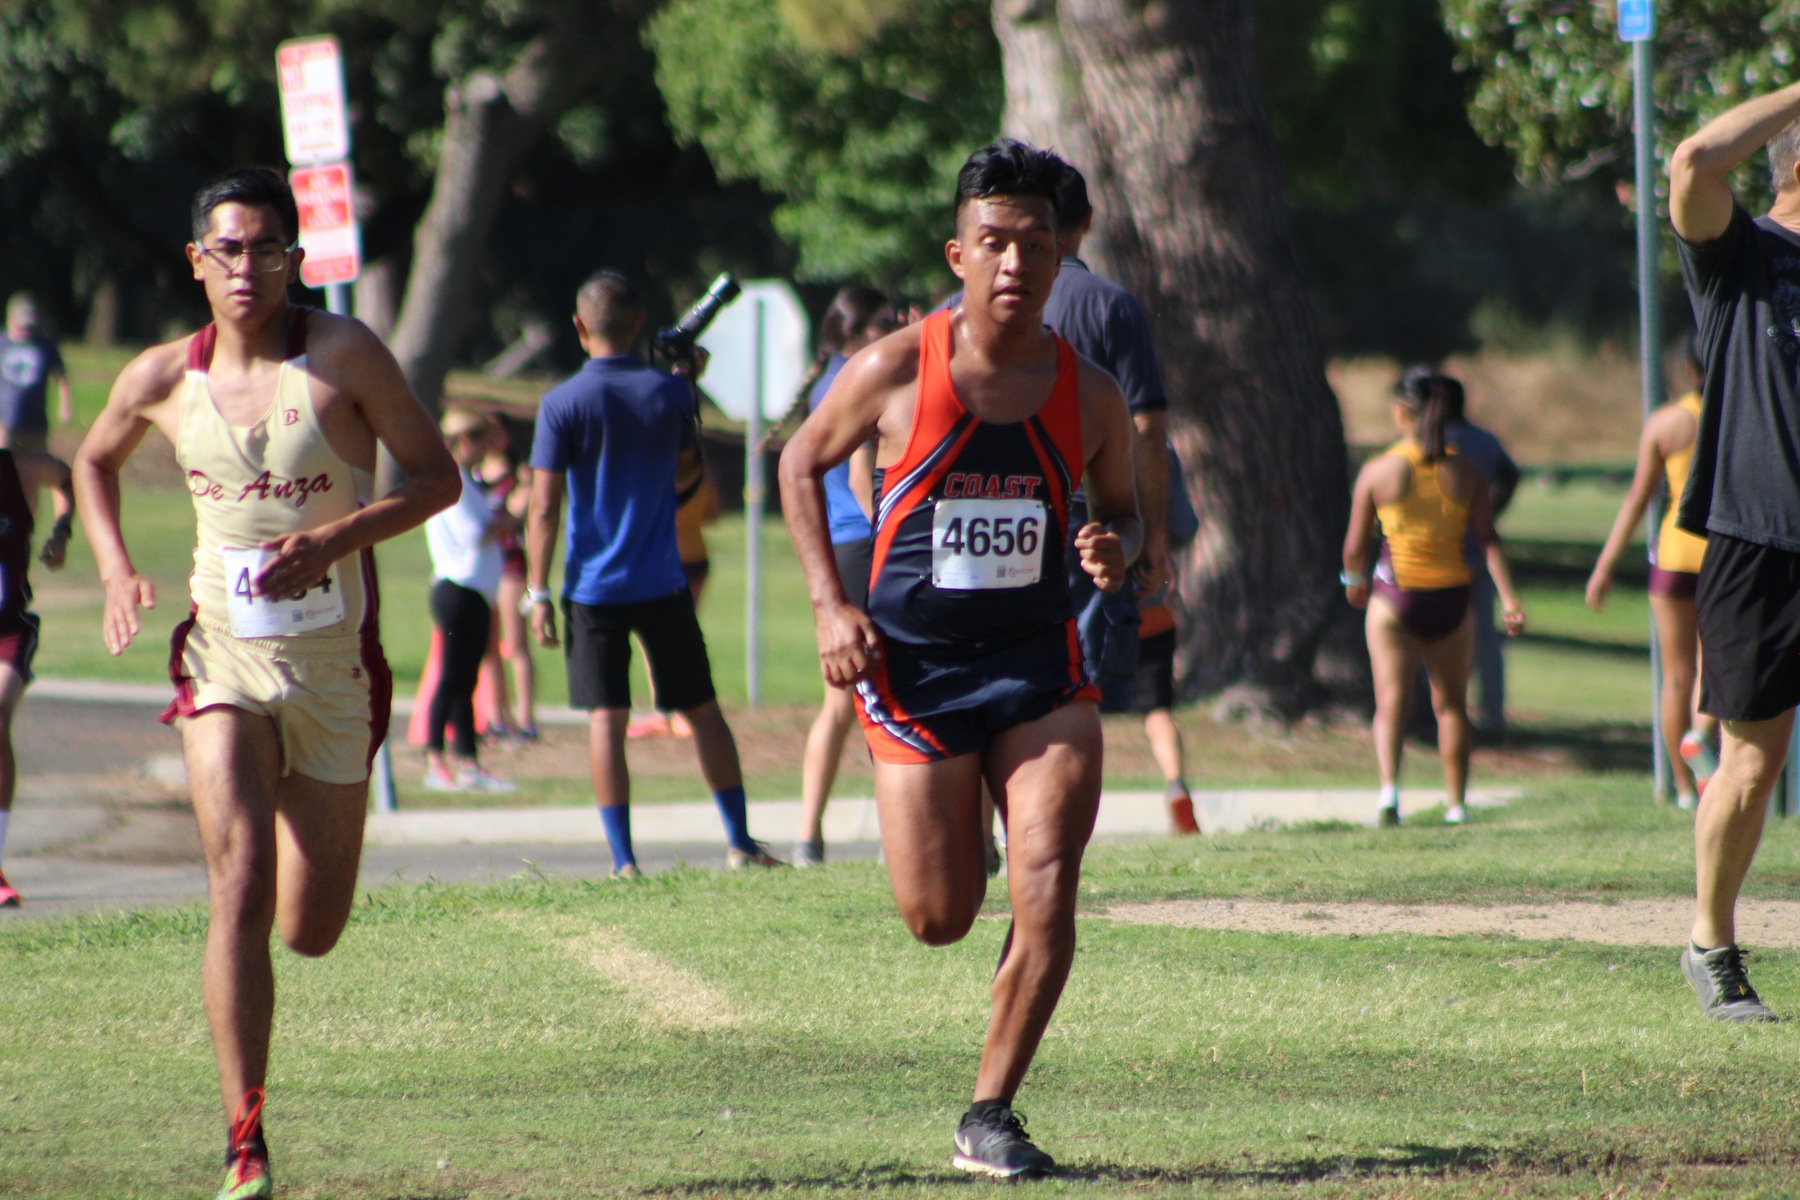 Pirate men place third overall at Titan Invitational